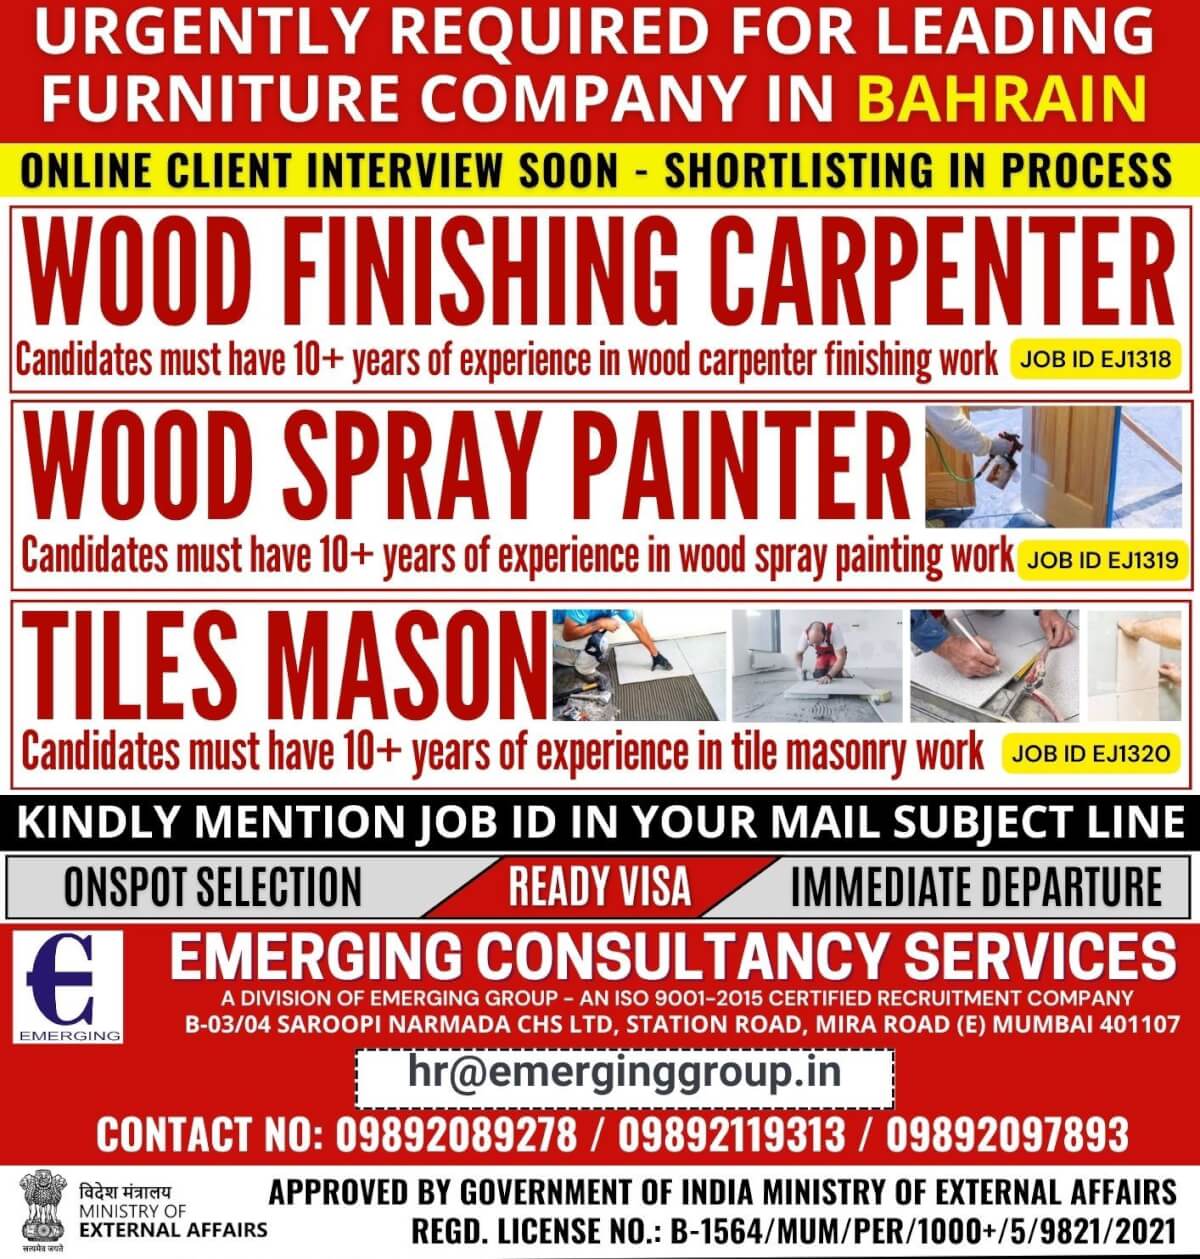 URGENTLY REQUIRED FOR LEADING FURNITURE COMPANY IN BAHRAIN